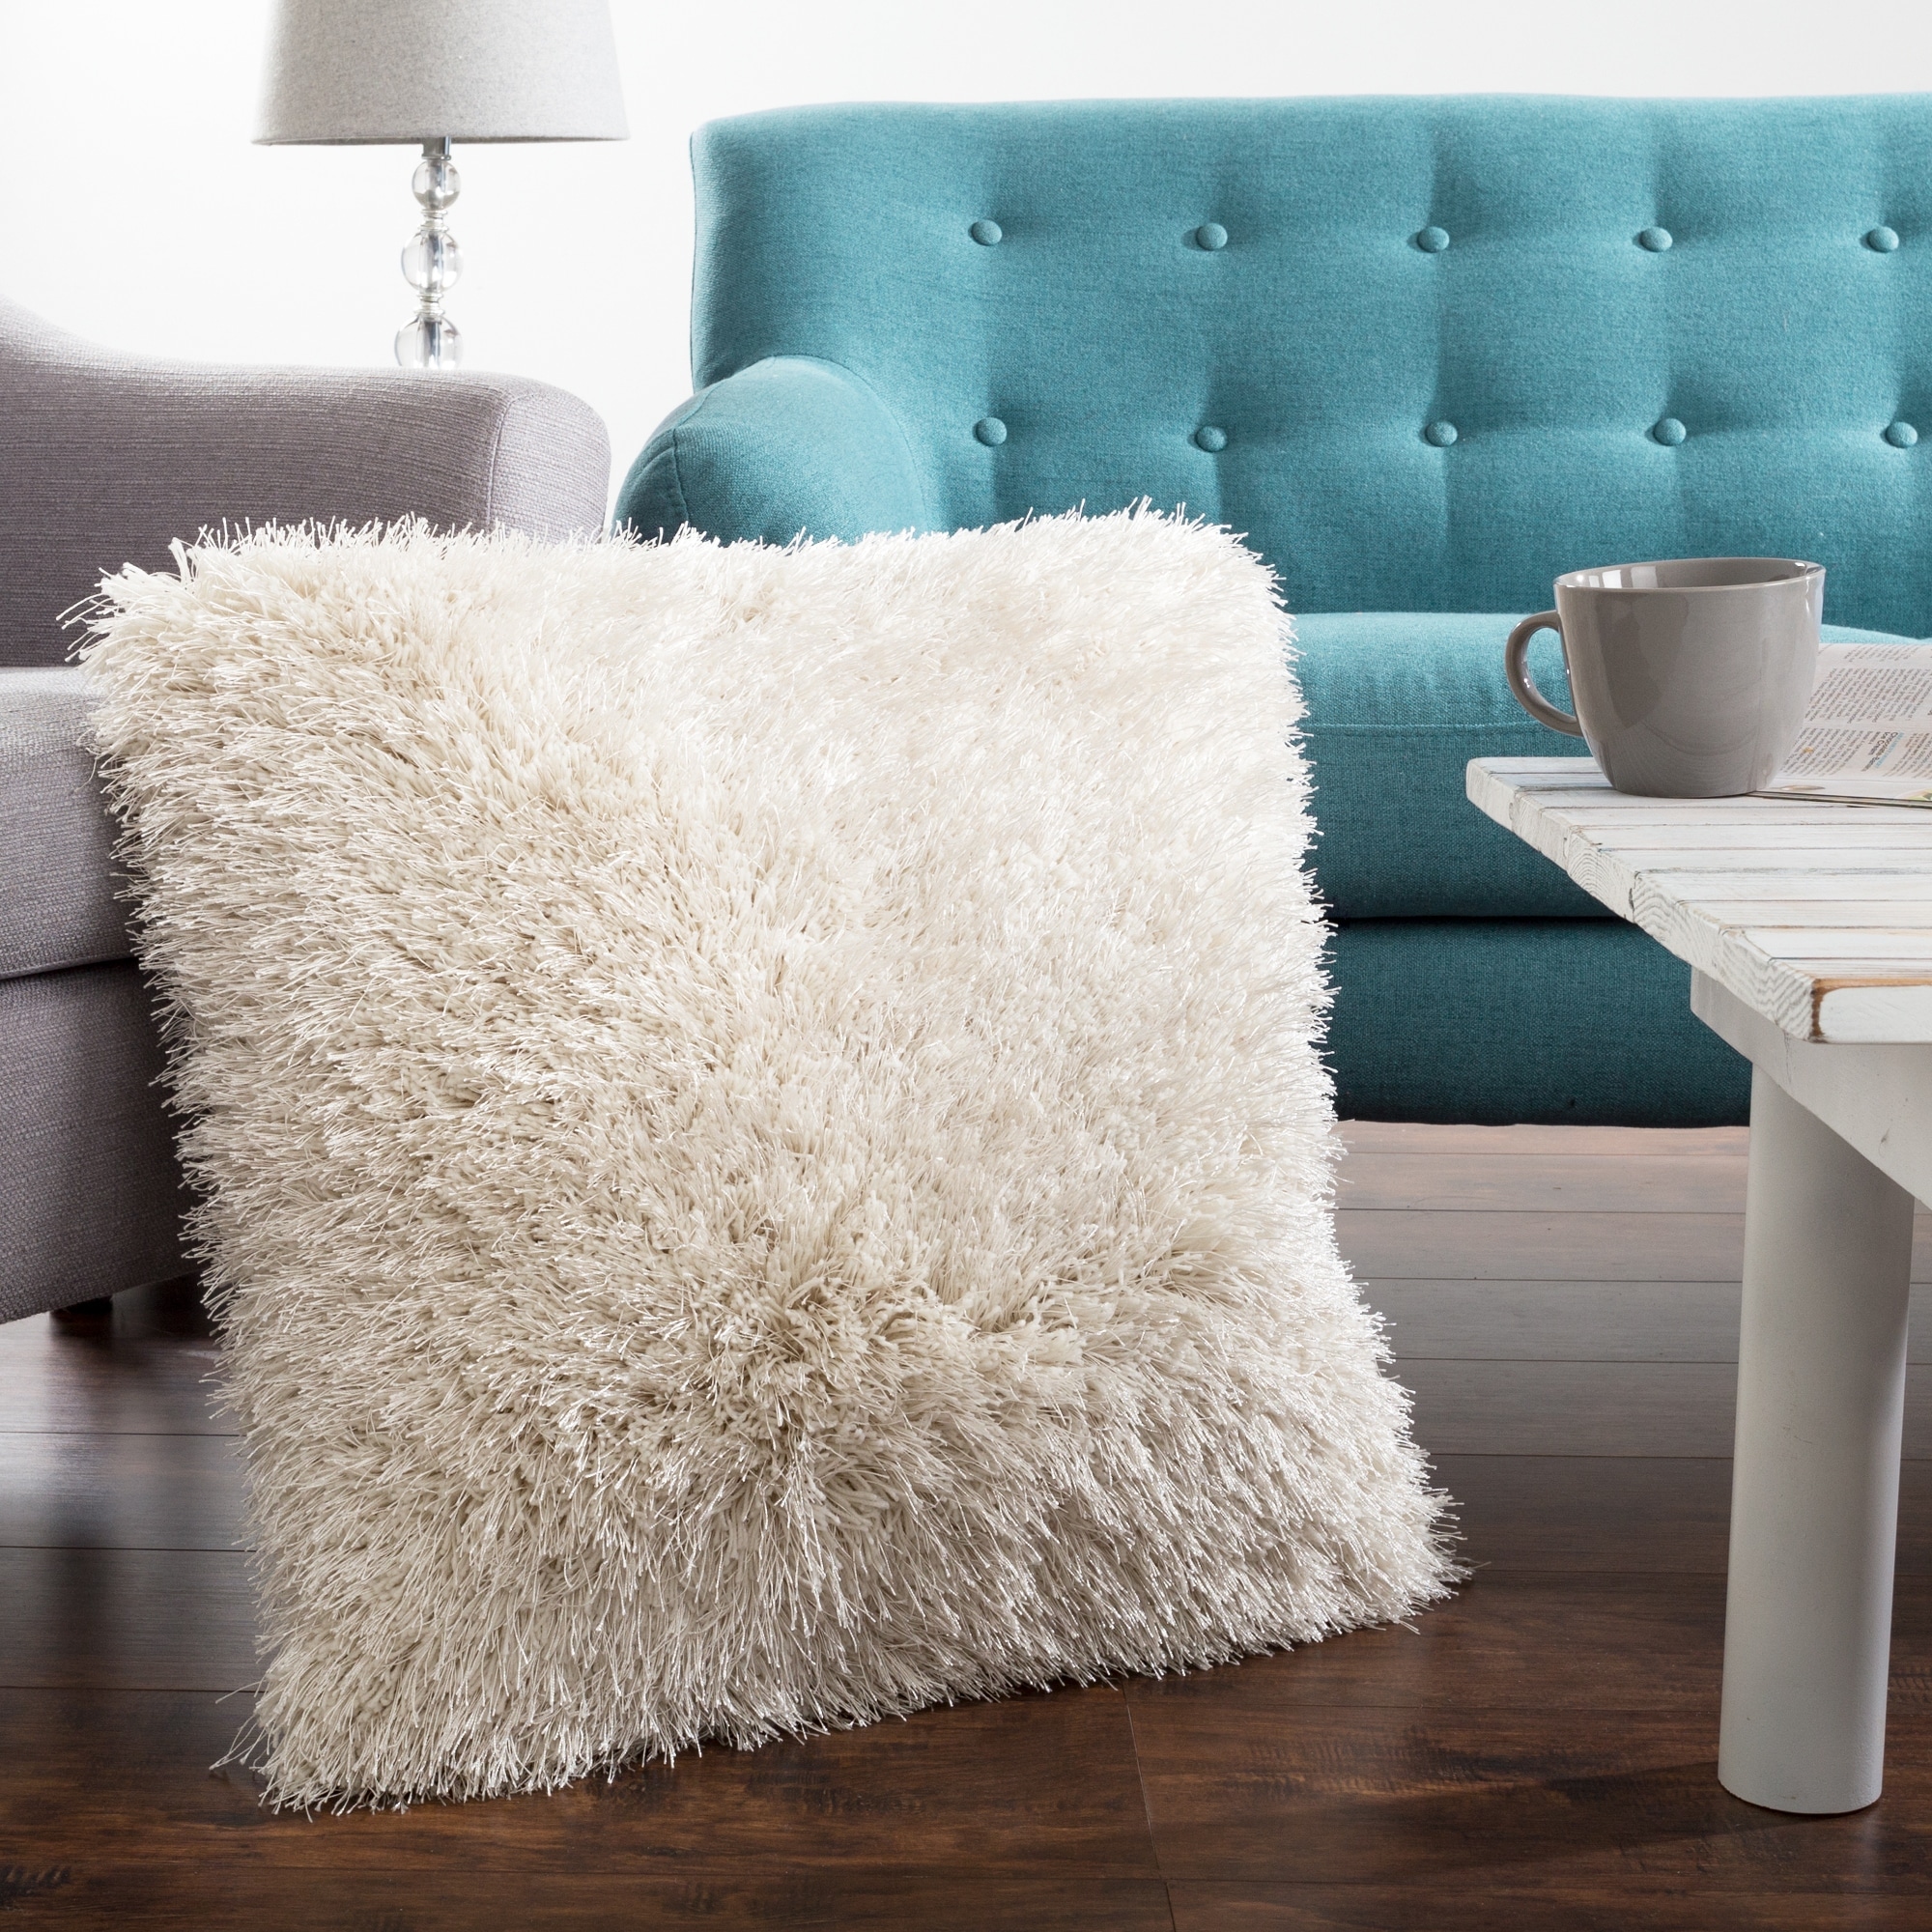 Oversized Hollow Pillow Designs : Floof snuggle sack and floor pillow